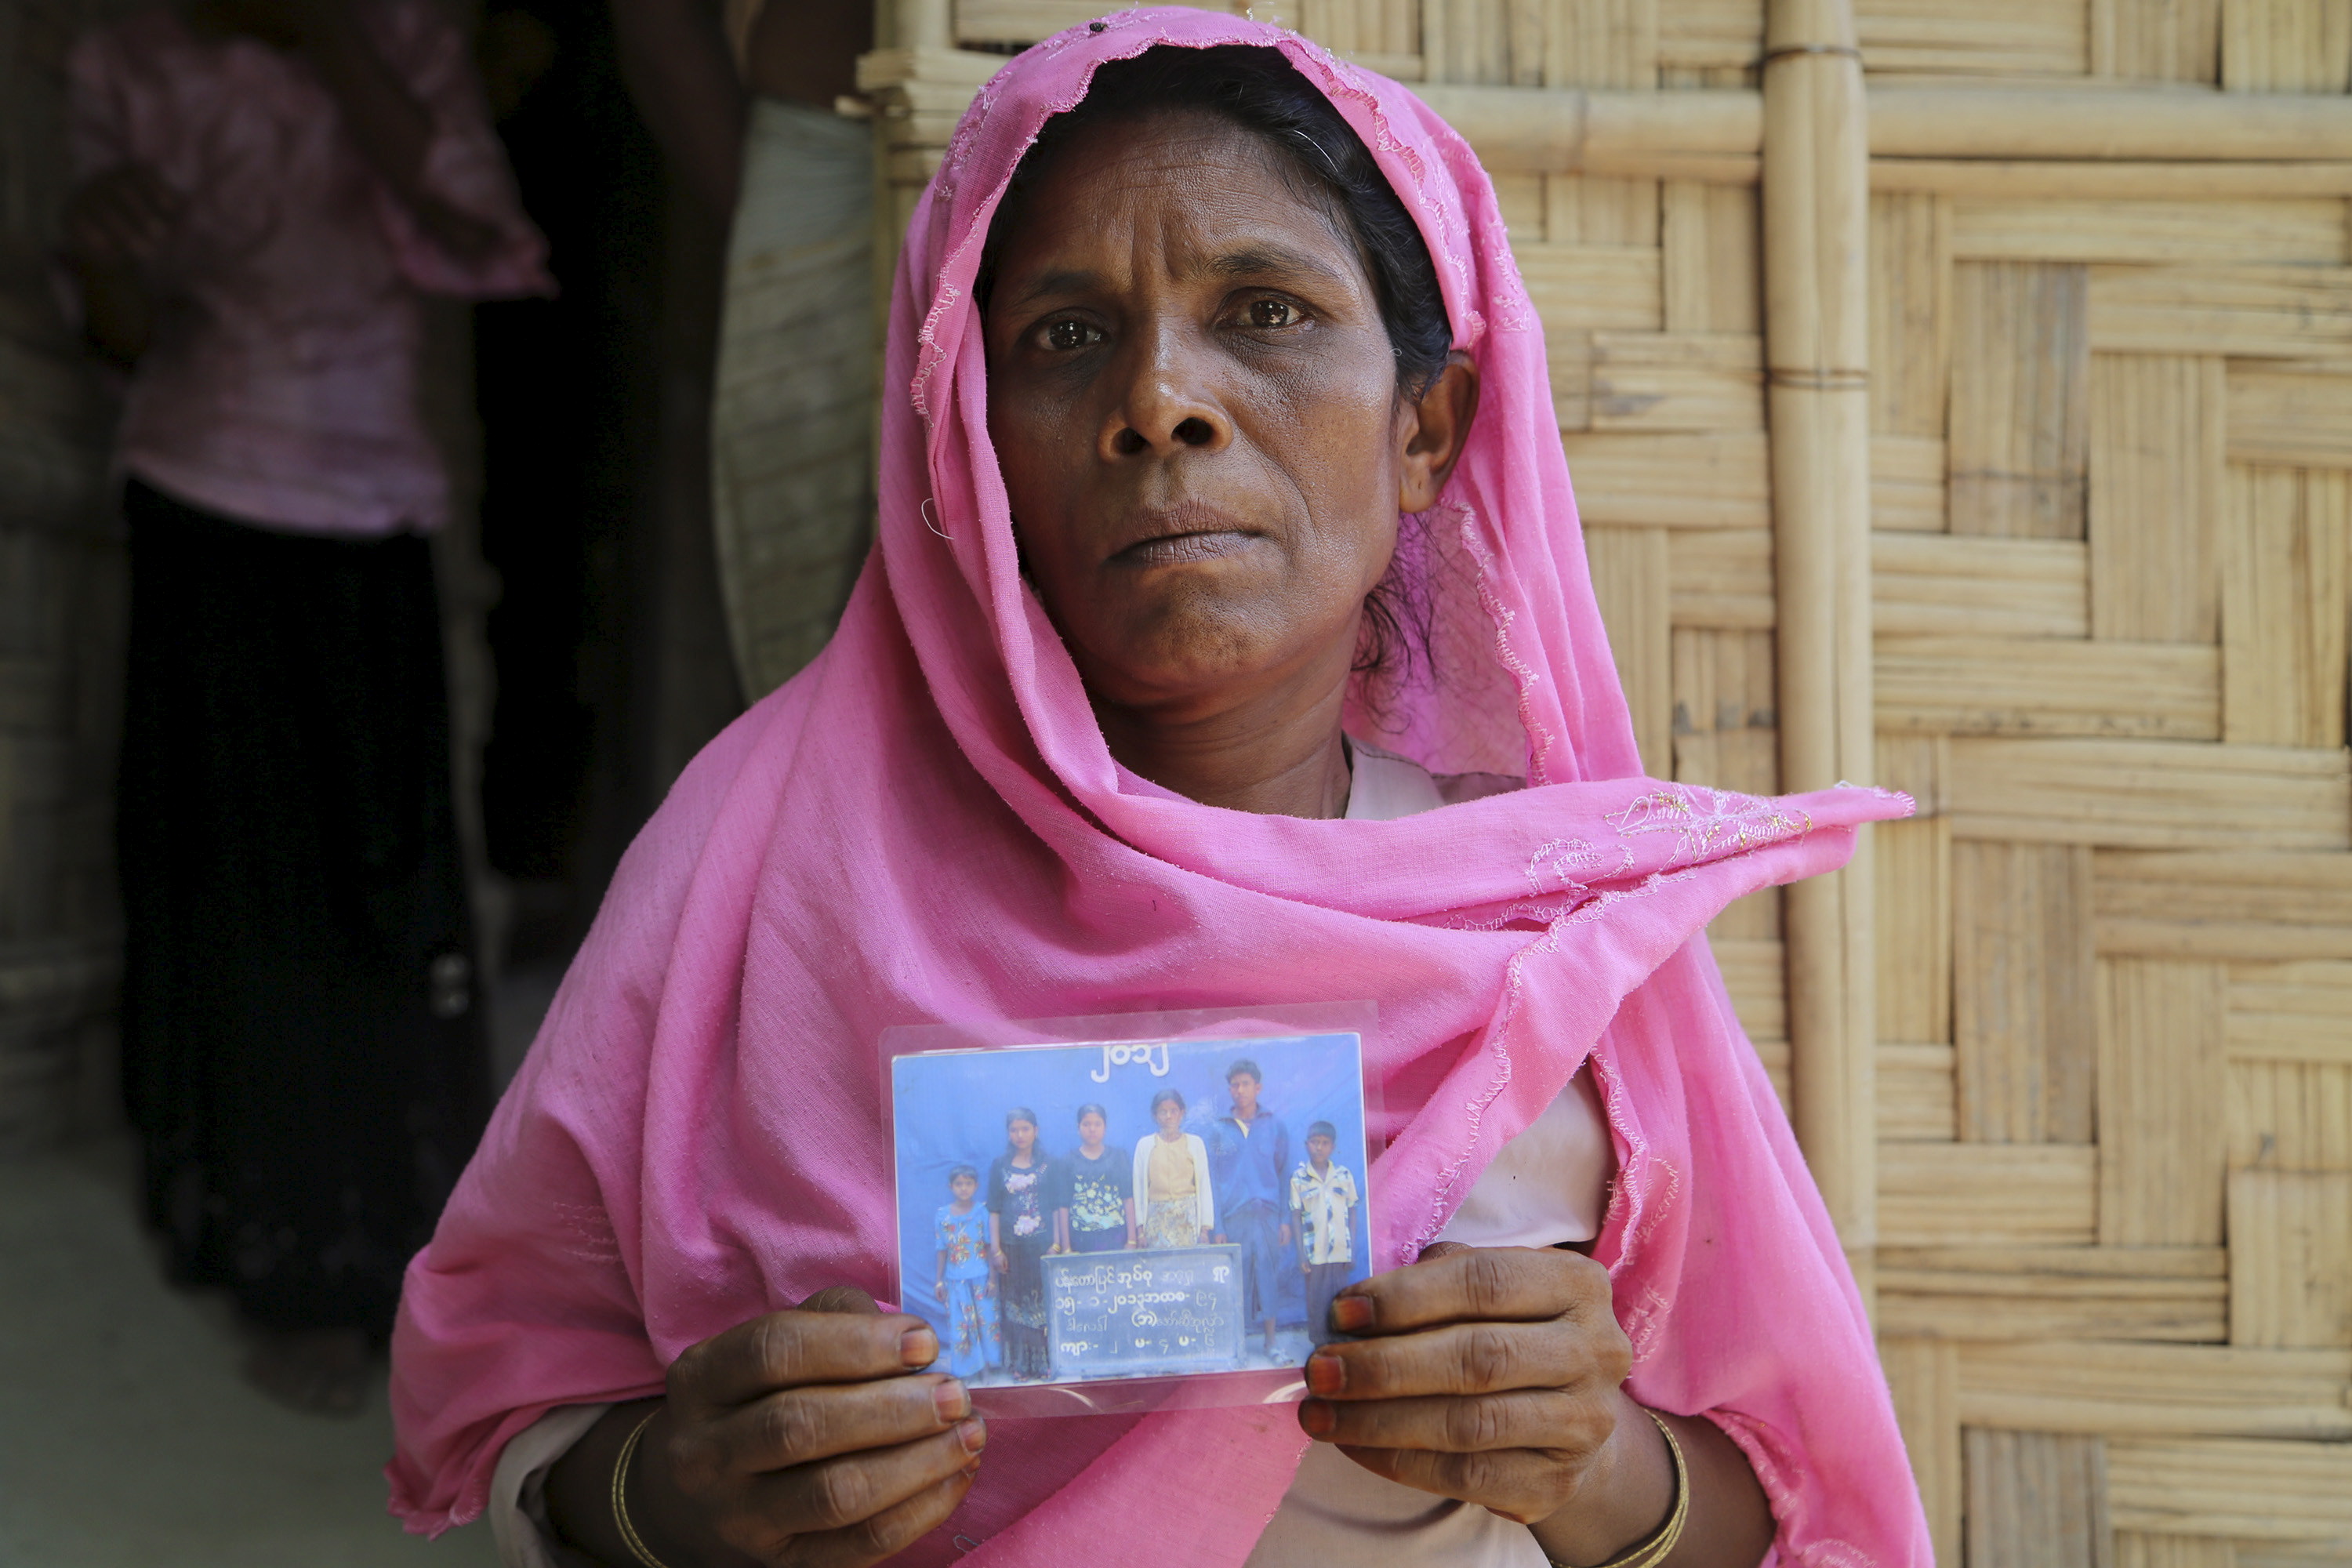 In this 7 June 2015 photo, Rohingya woman Se Tara, in Rakhine state, holds up a family photograph that shows her two missing children, aged 12 and 18, who had set out to sea in February 